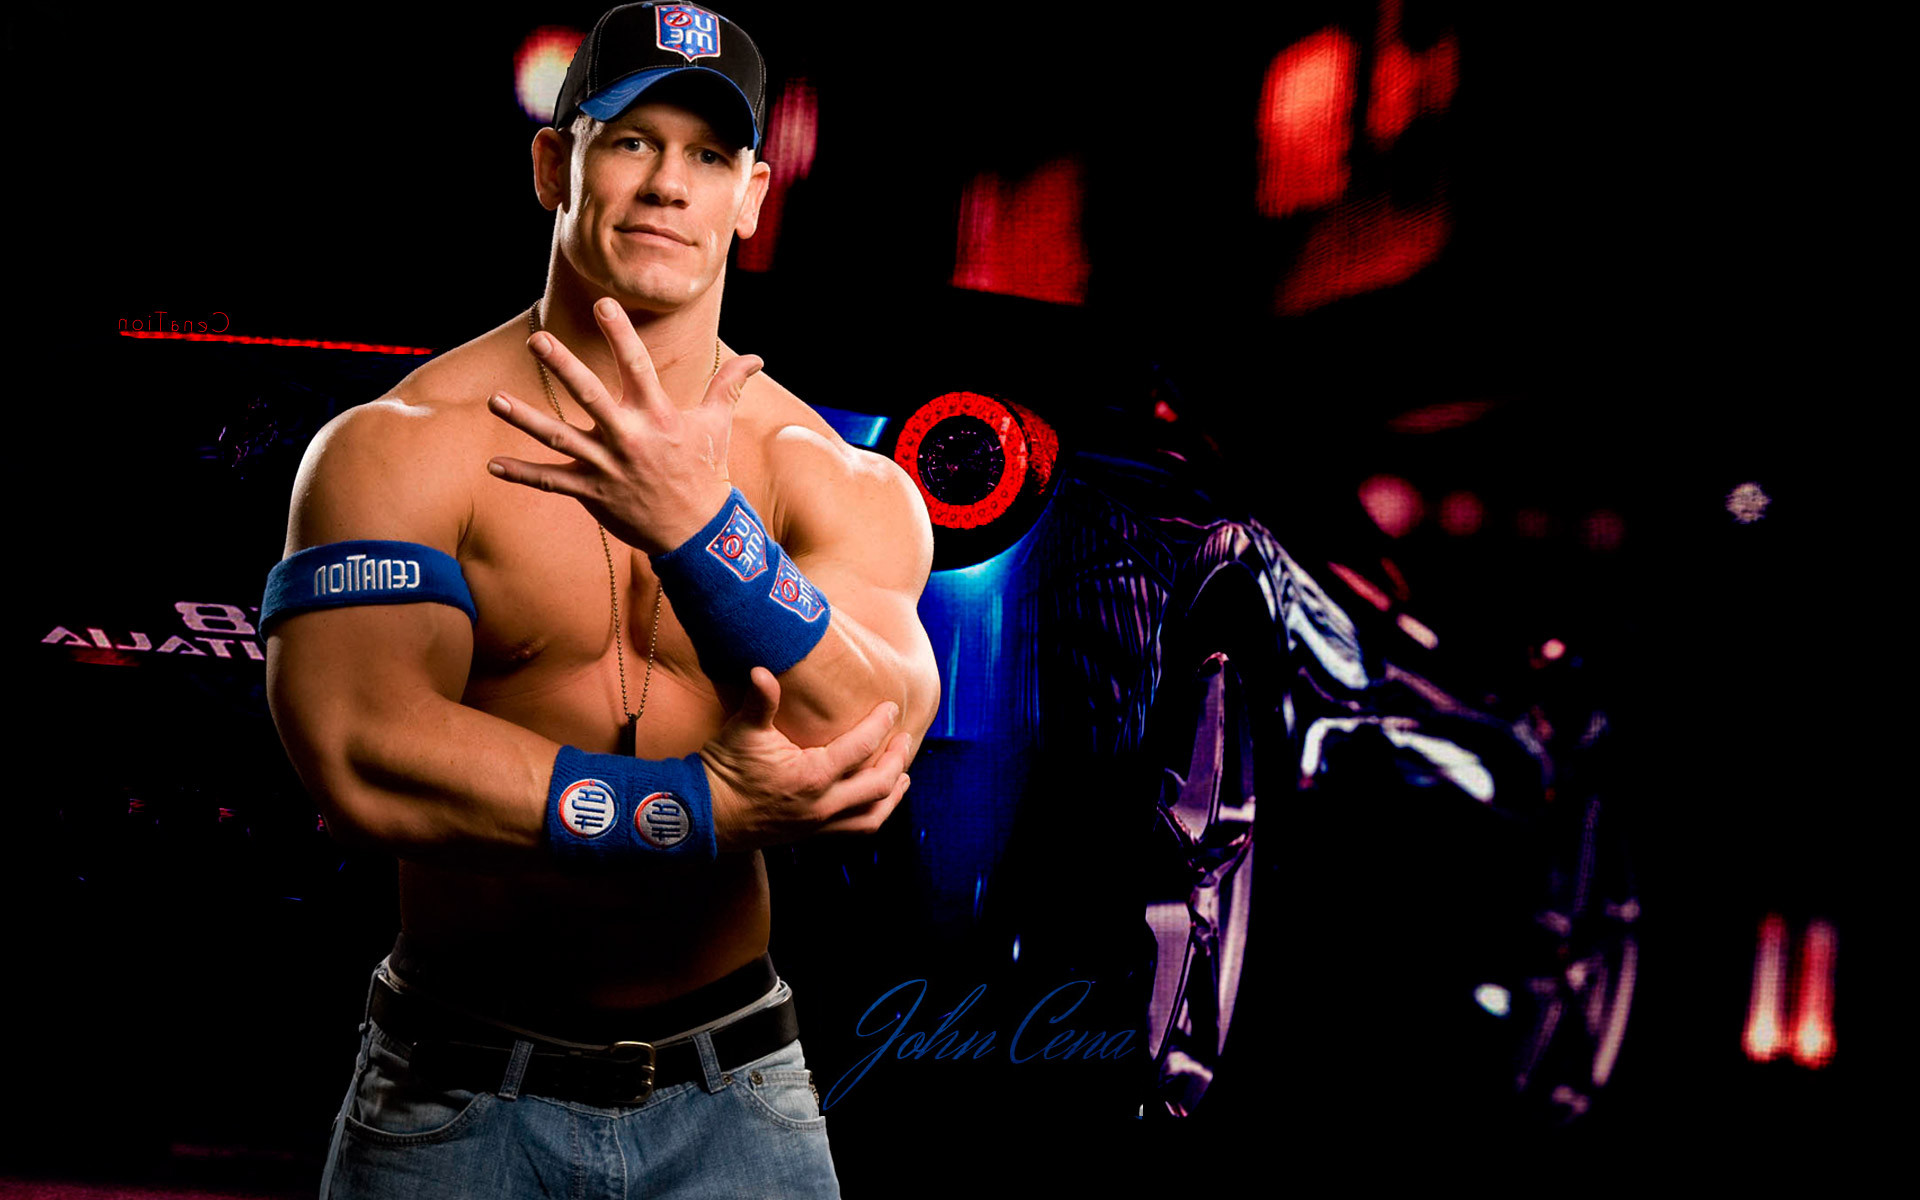 1920x1200 John Cena HD Images : Get Free top quality John Cena HD Images for your  desktop PC background, ios or android mobile phones at WOWHDBackgrounds.com  ...